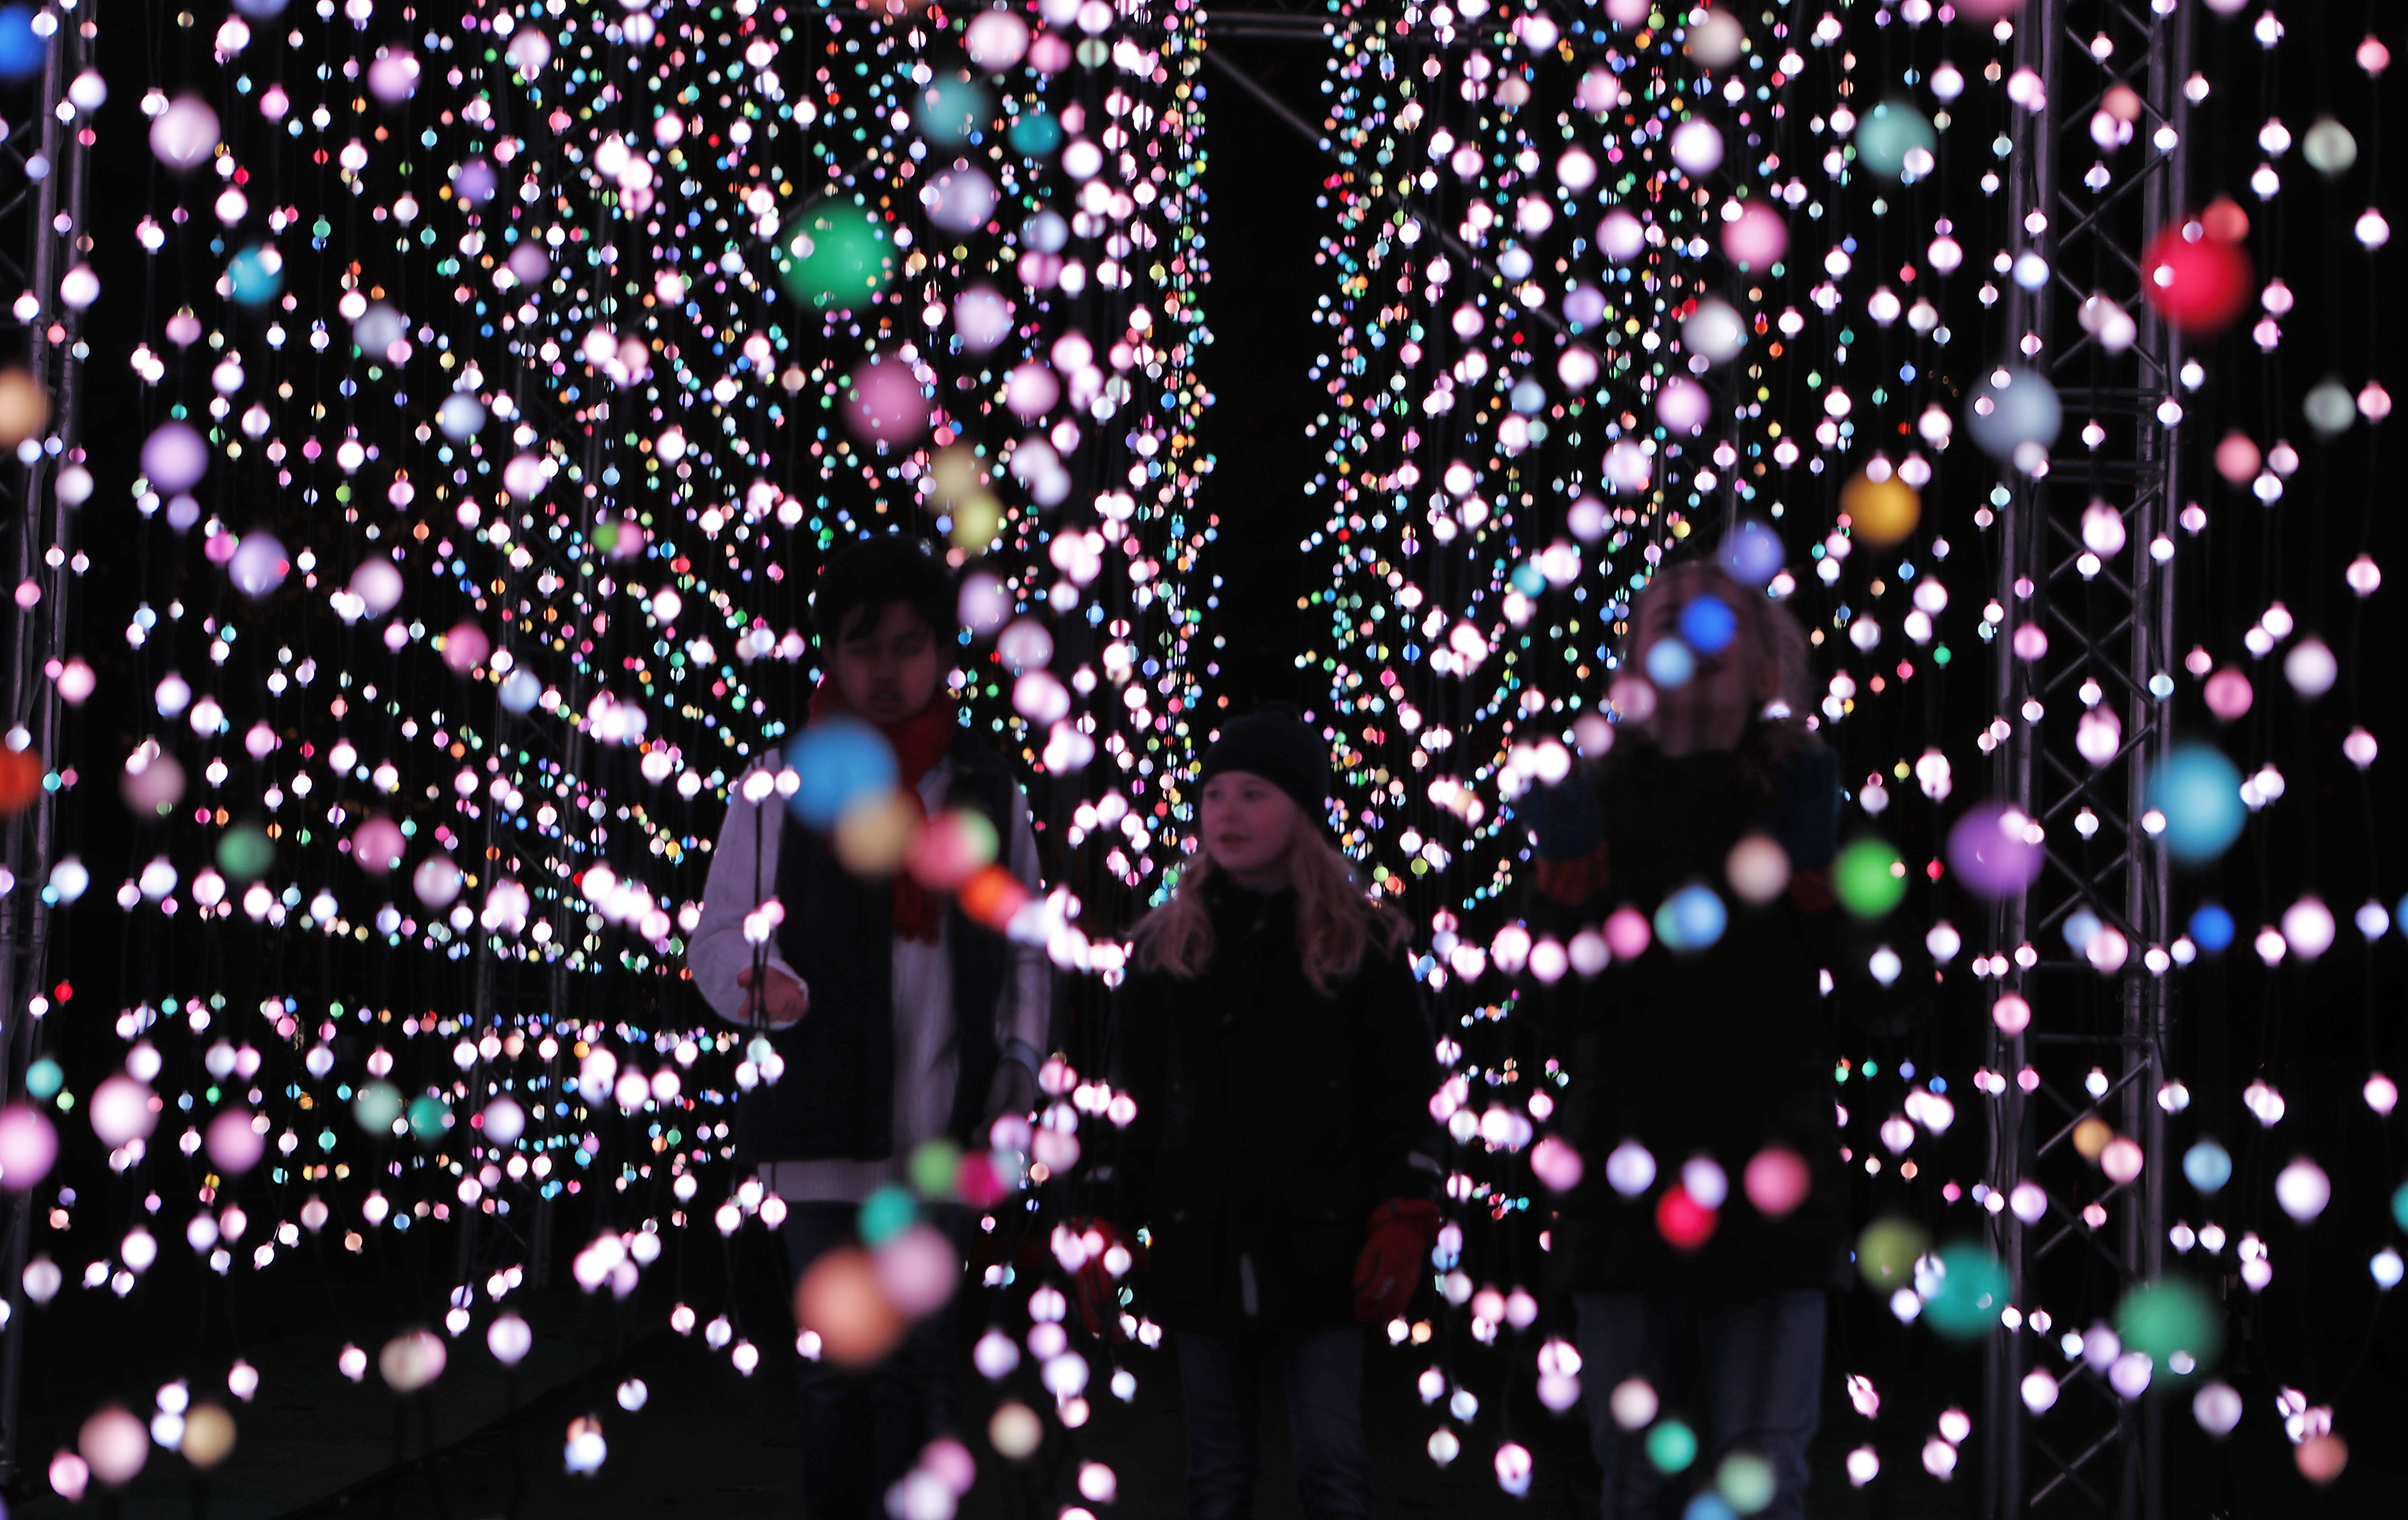 Visitors walk through the 'Feast of Light' part of the illuminated trail through Kew Gardens magnificent after-dark landscape, lit up by over one million twinkling lights in London, Wednesday, Nov. 21, 2018. The spectacular light and sound installations run from 22, November 2018 – 5, January 2019.(AP Photo/Frank Augstein)